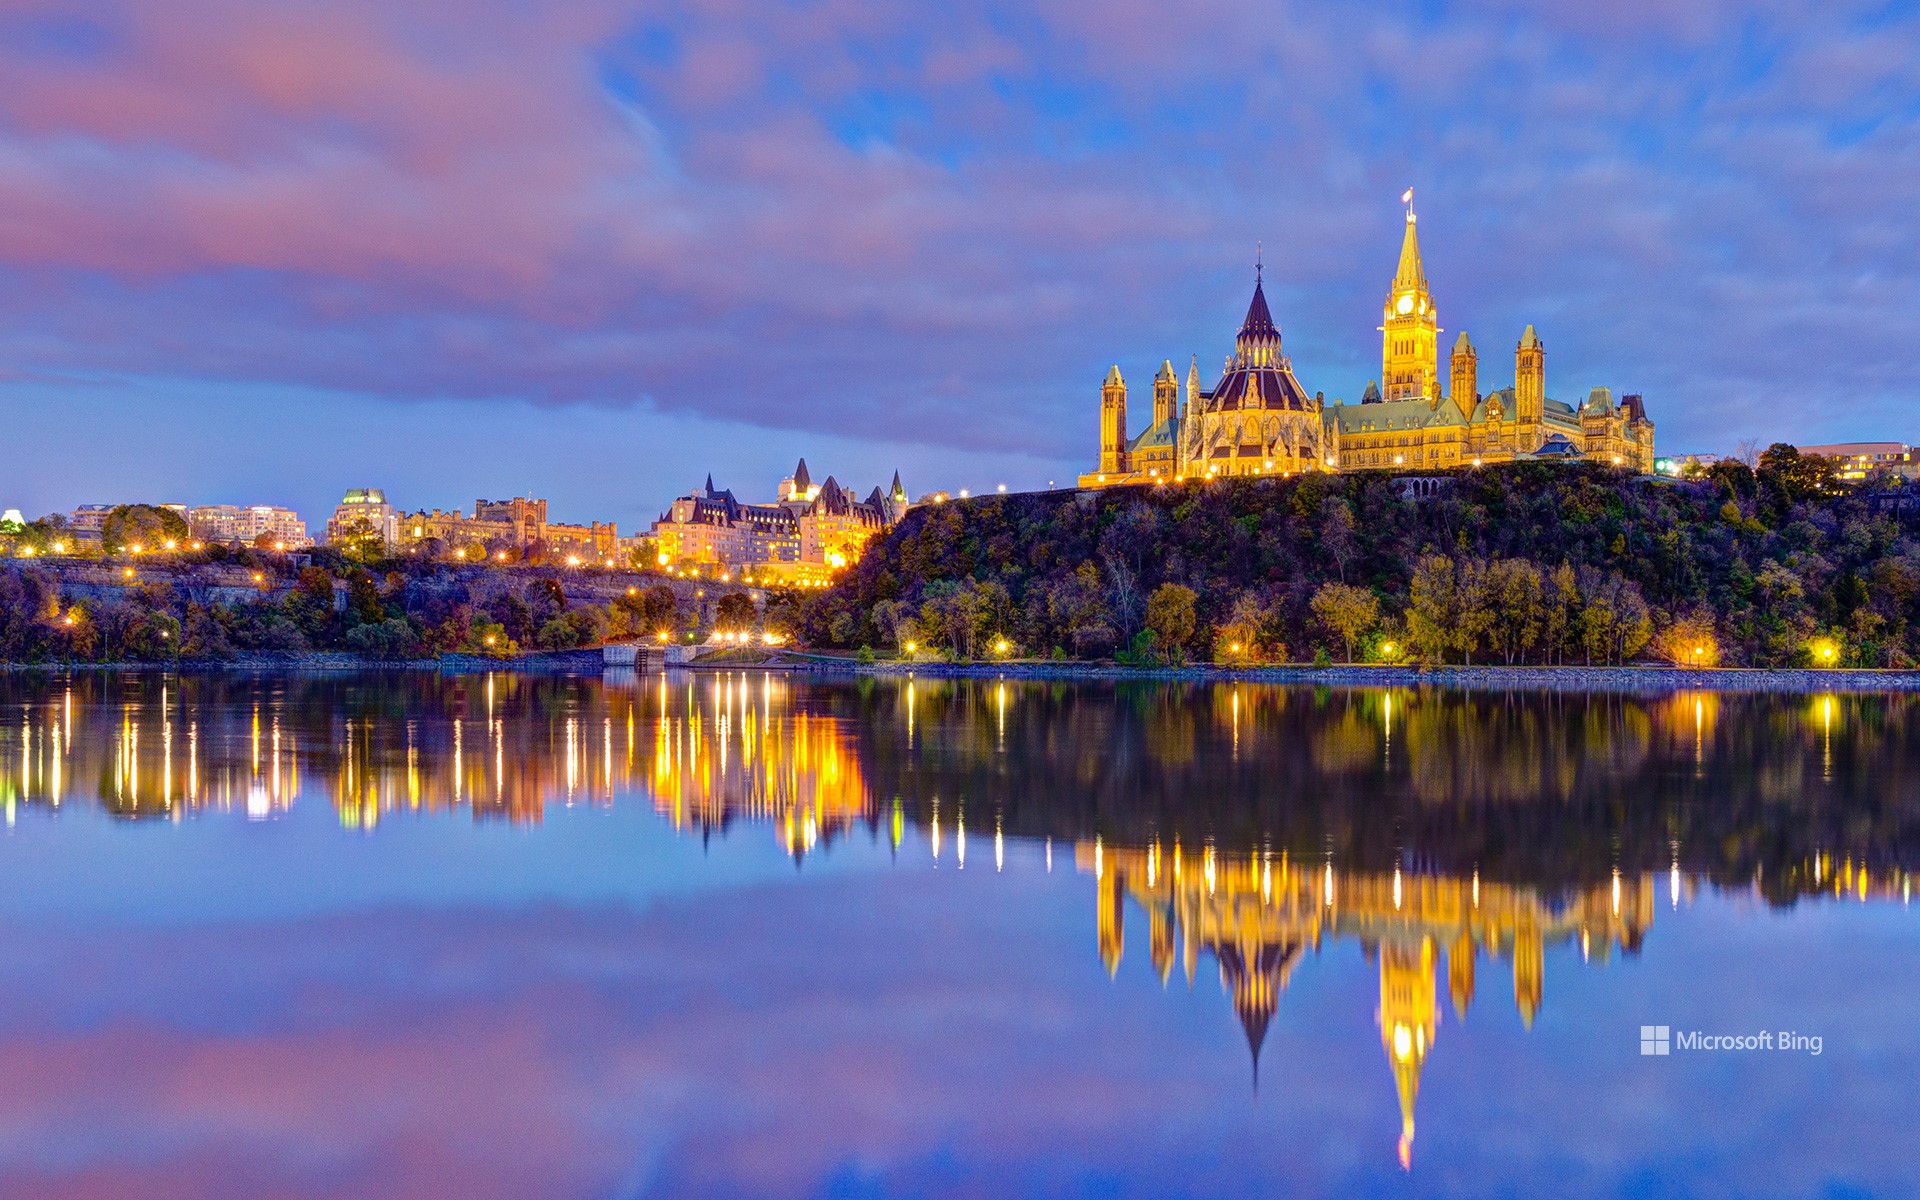 The Parliament buildings across the Ottawa River in Ottawa